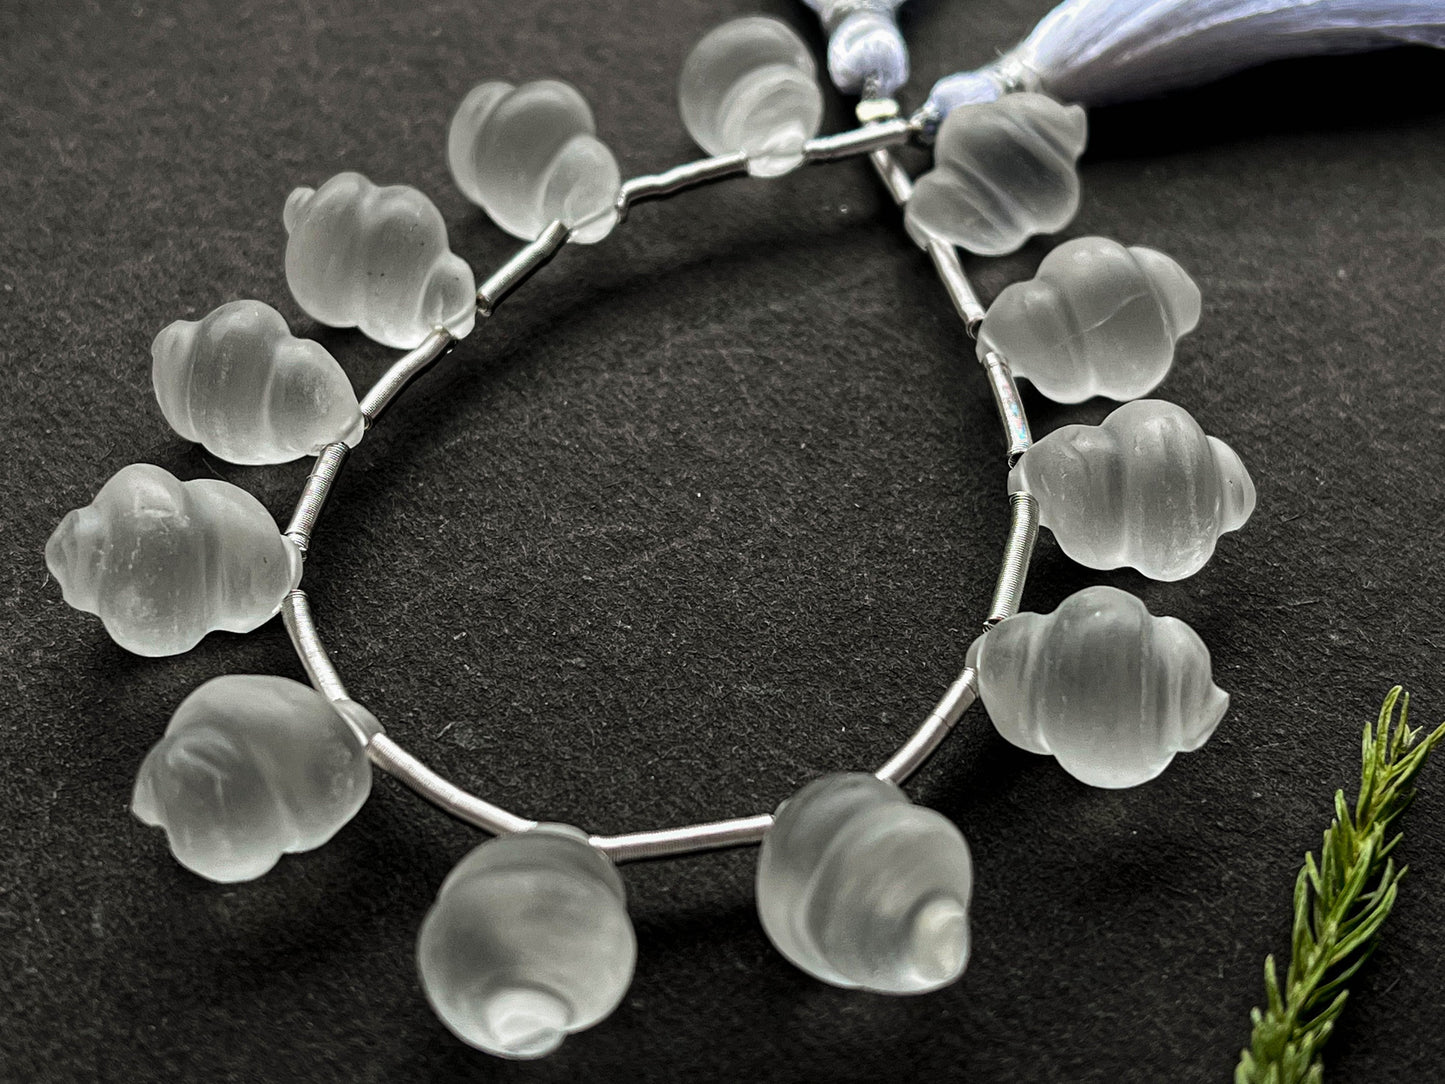 12 Pieces Natural Crystal Carved Frosted Shell Shape Beads Beadsforyourjewelry